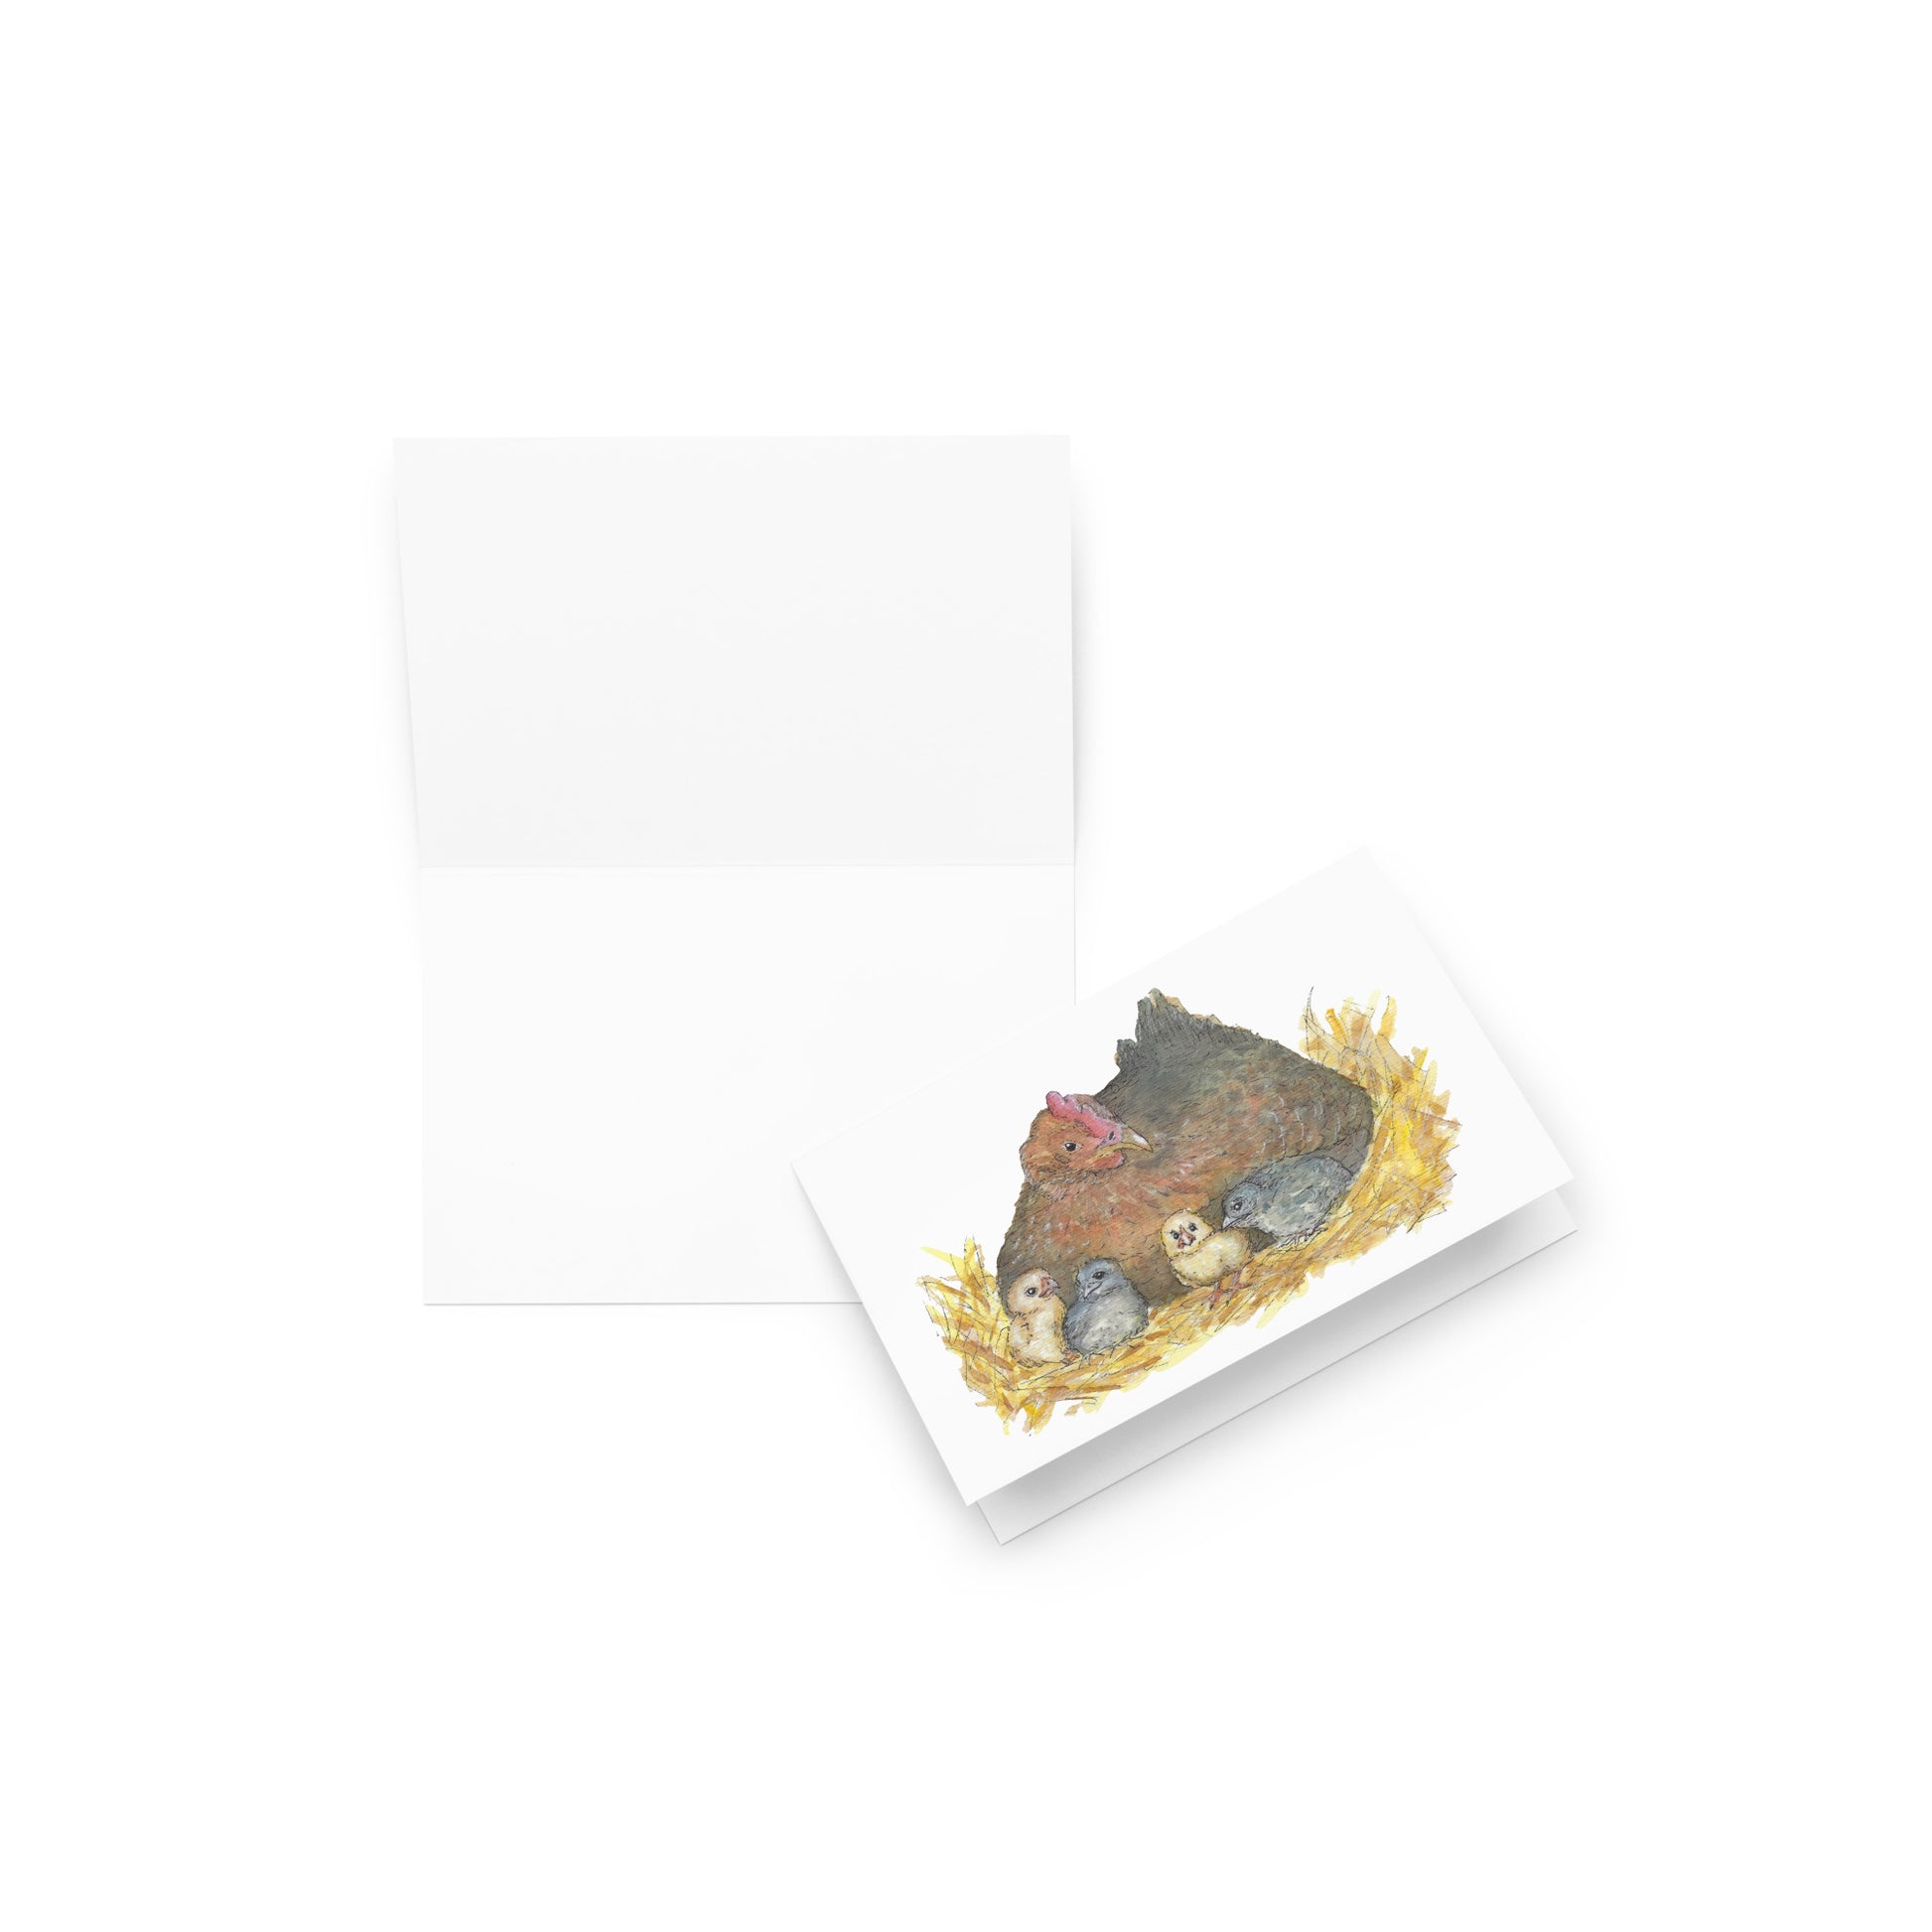 4 by 6 inch greeting card and envelope. Front features watercolor print of a mother hen and four chicks in a nest. Inside is blank. Image shows blank inside of card and front of folded card.